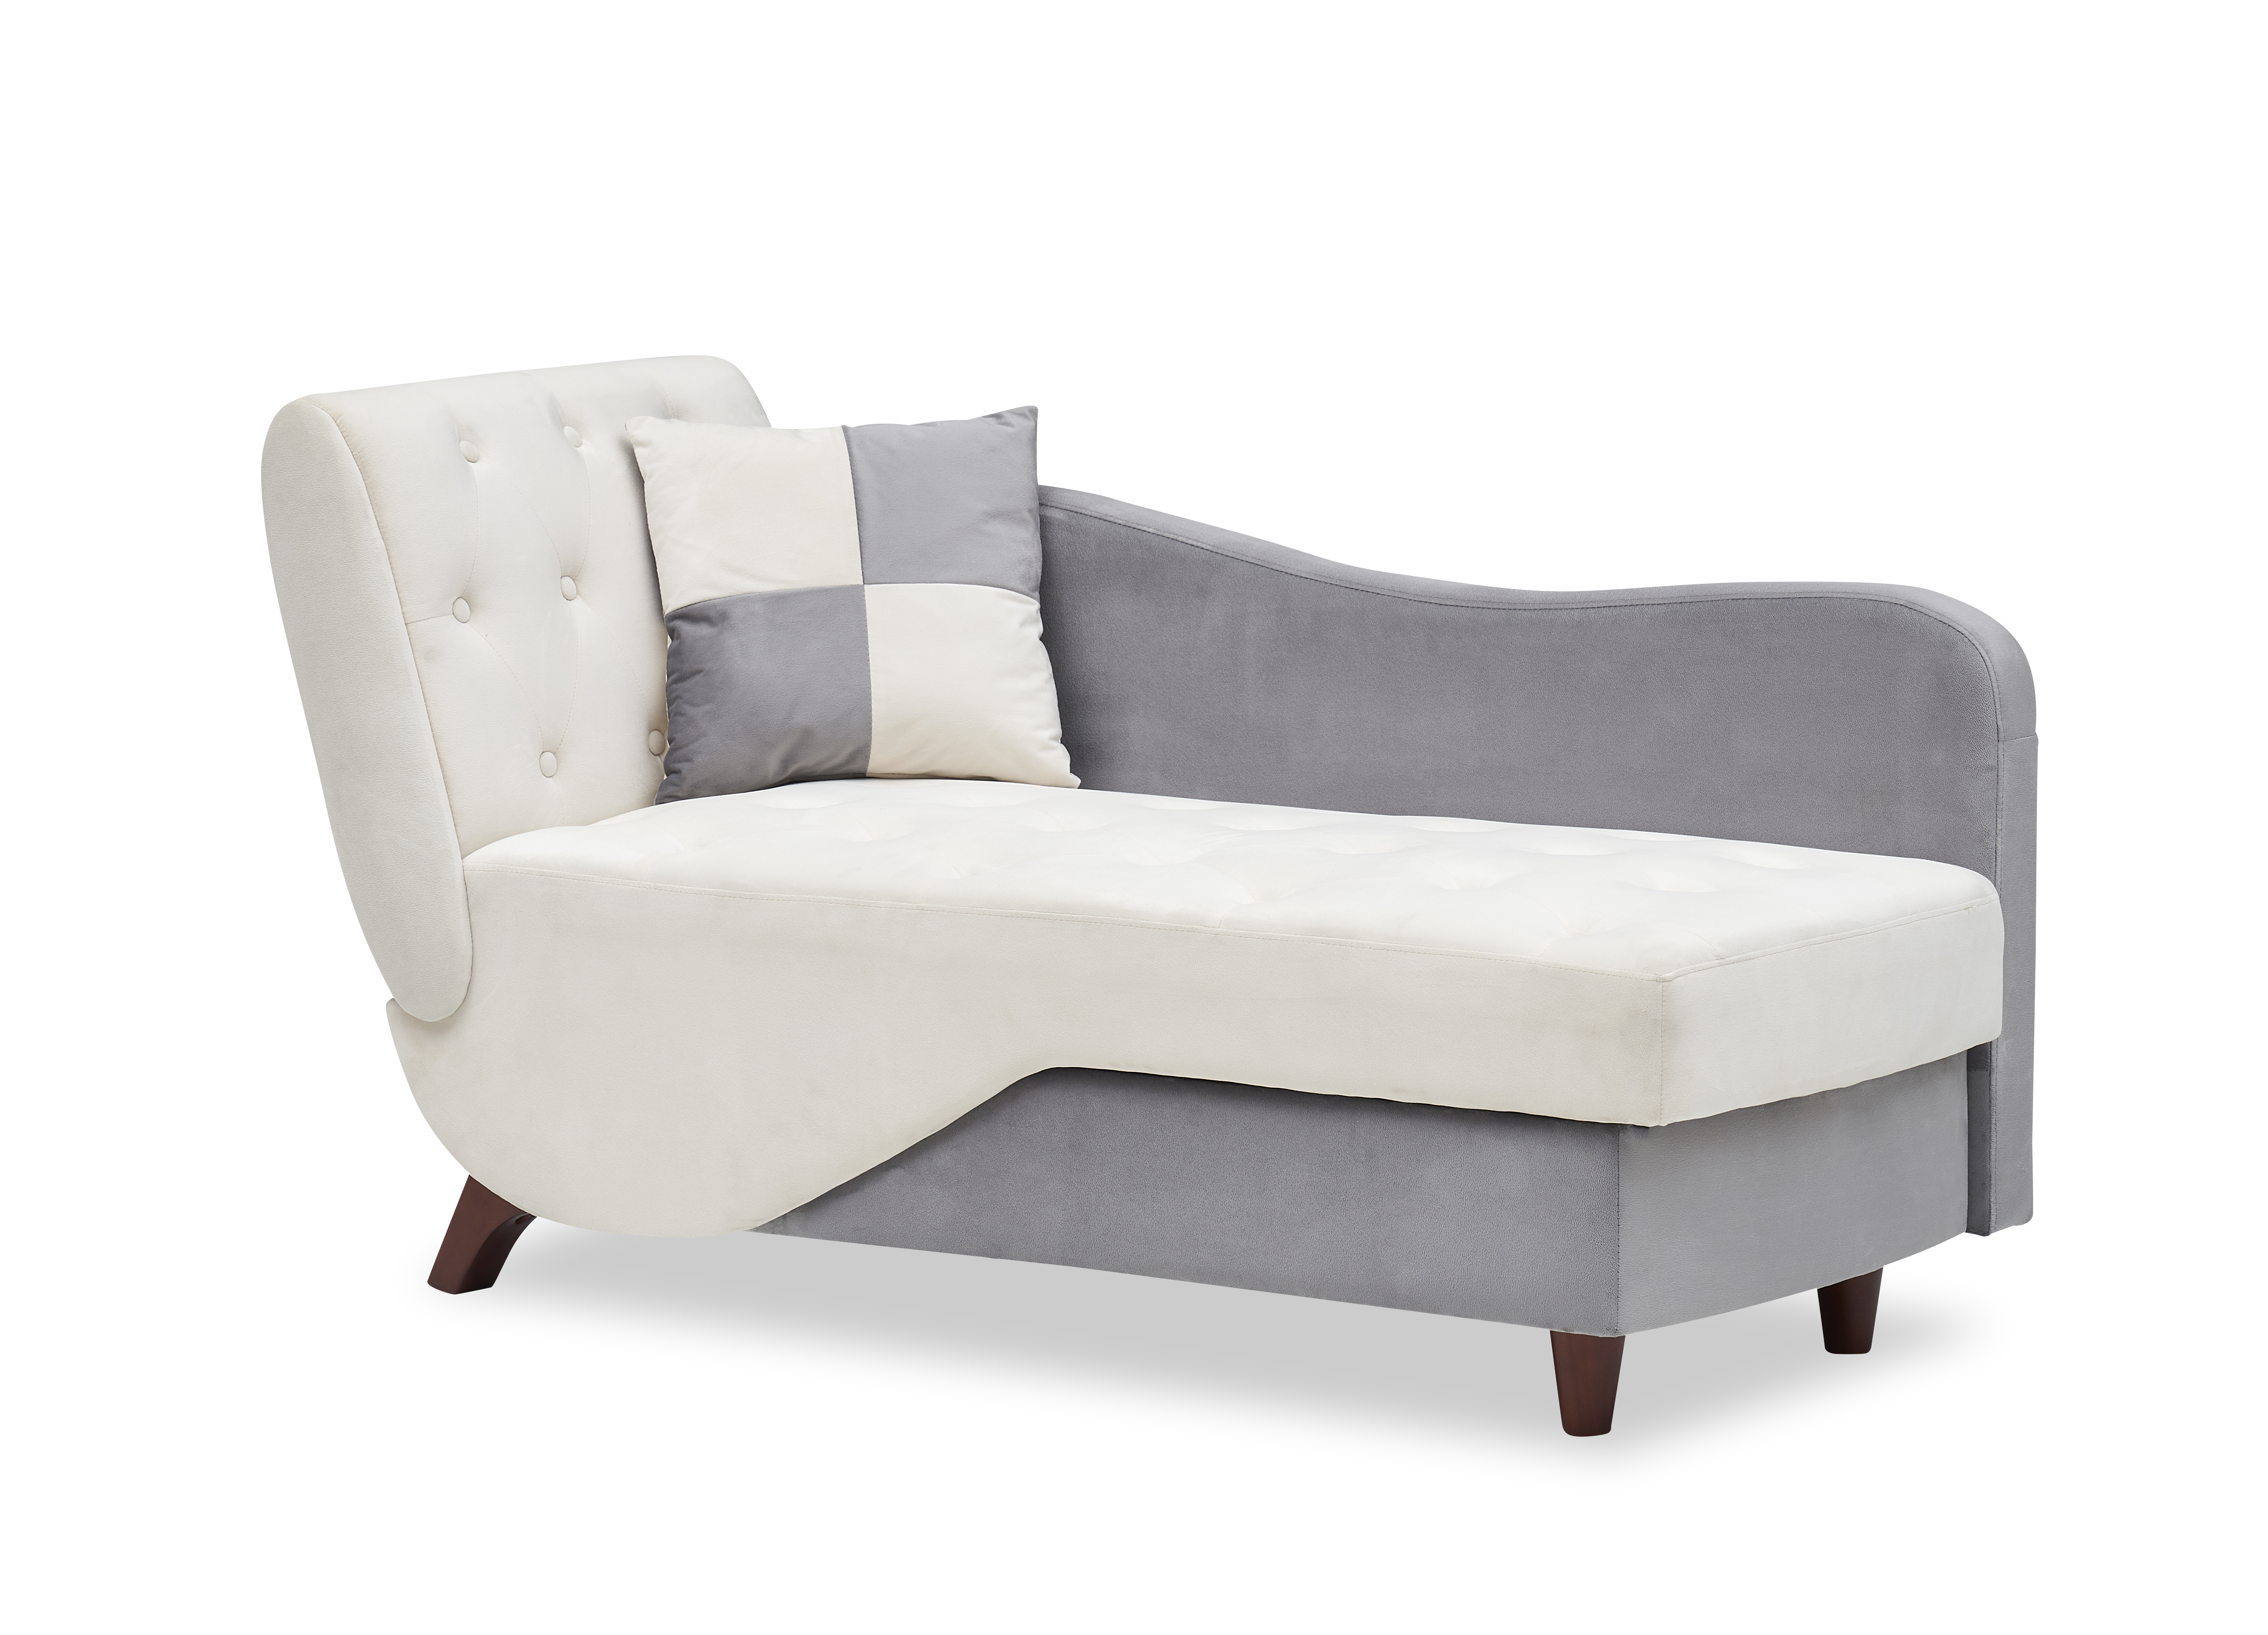 New+Beige adjustable living room sofa bed with storage cushions including a pillow-CASAINC